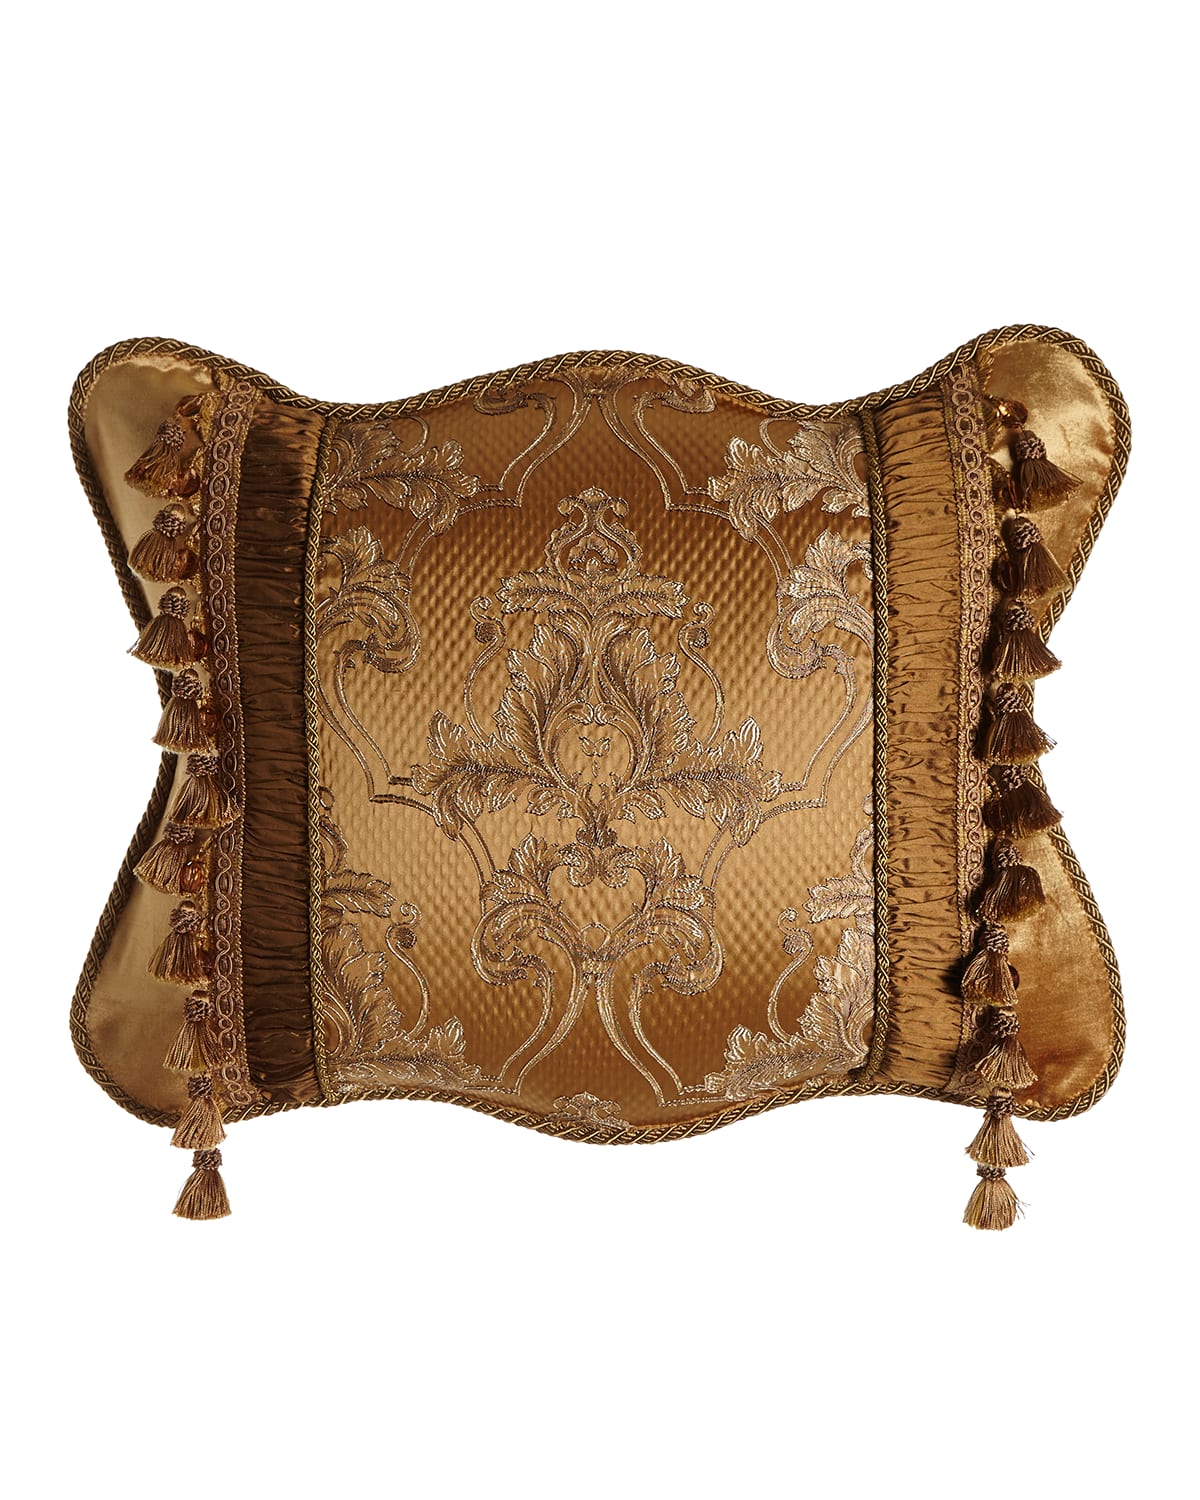 Image Dian Austin Couture Home King Camilla Scalloped Sham